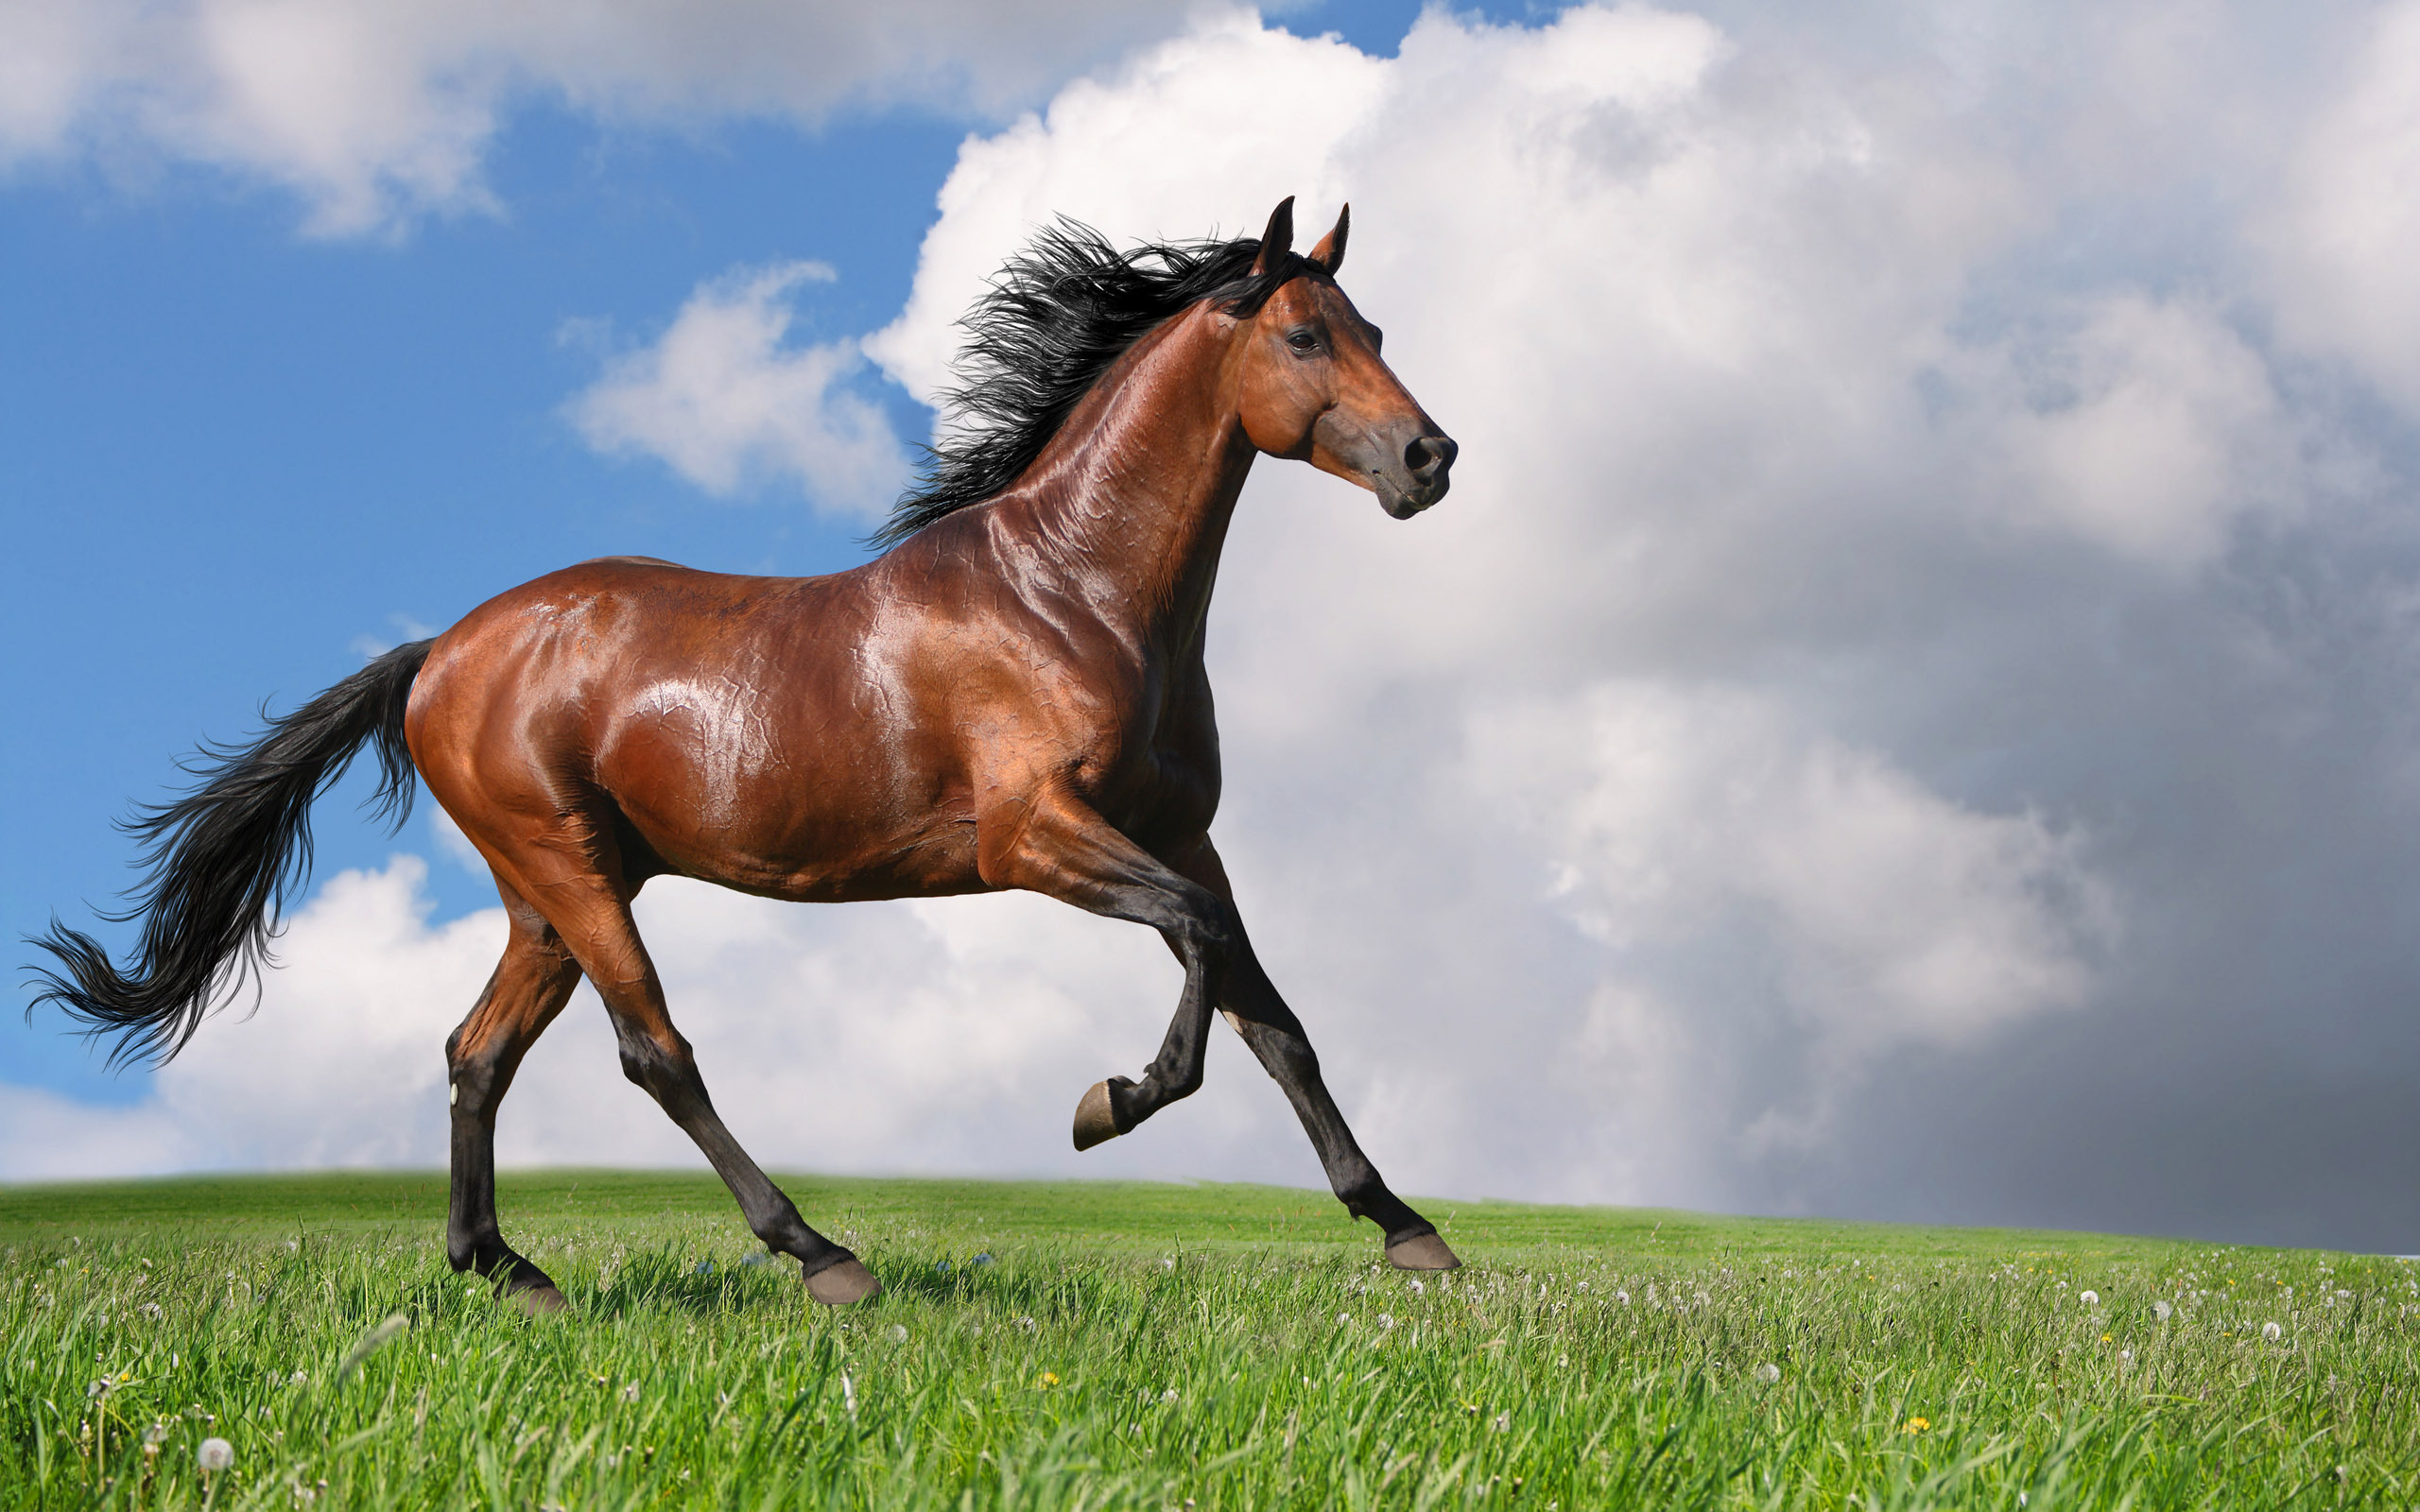 Racehorse wallpapers and images   wallpapers pictures photos 2560x1600